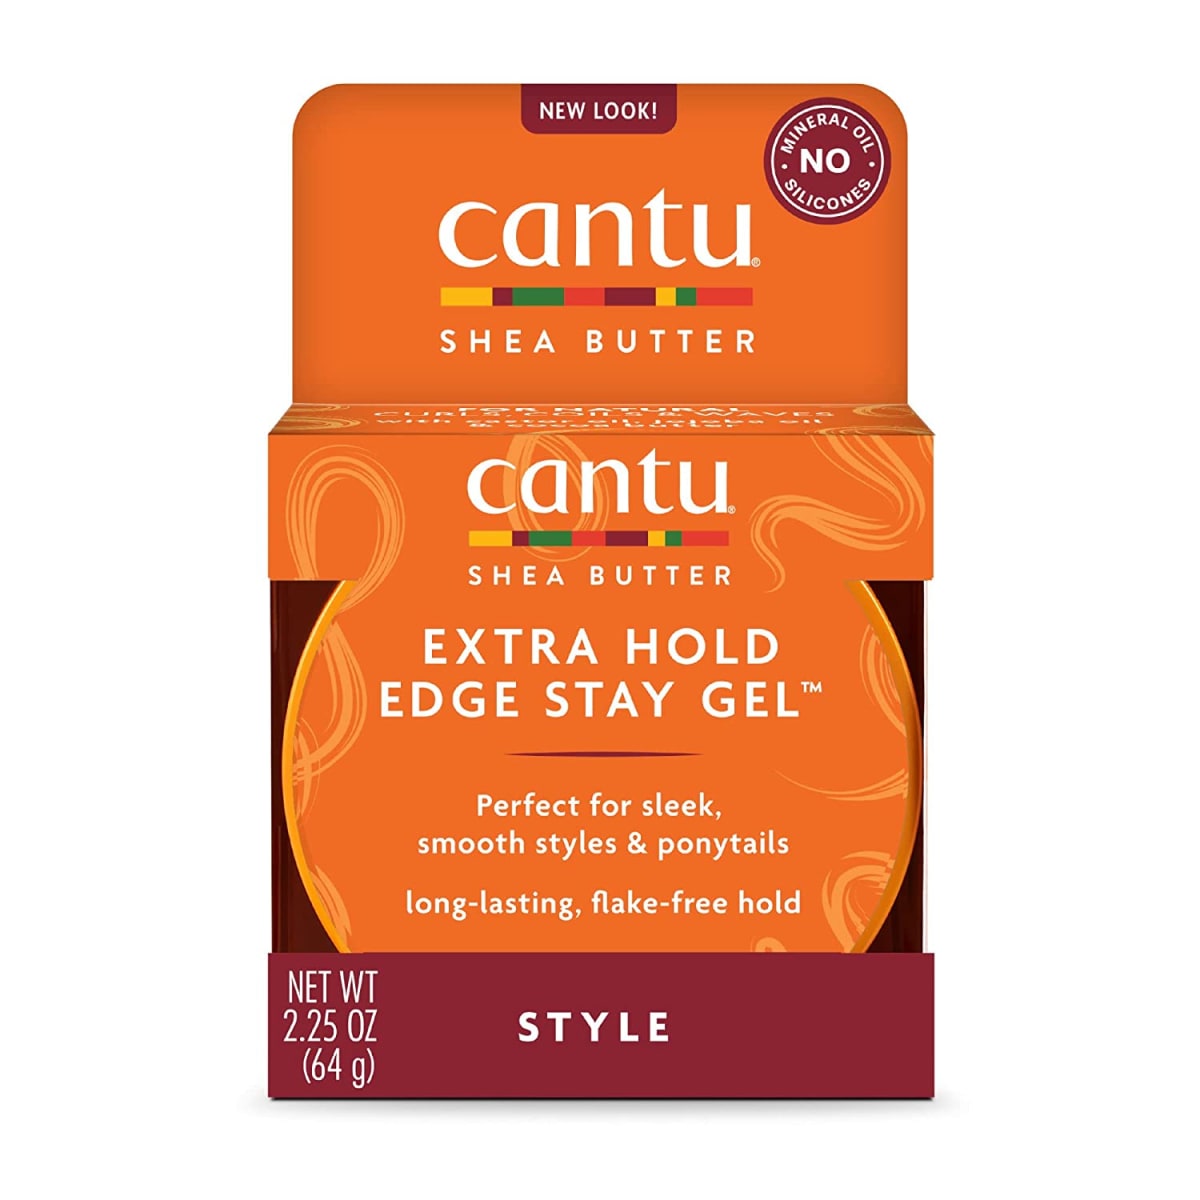 Extra Hold Edge Stay Gel with Shea Butter